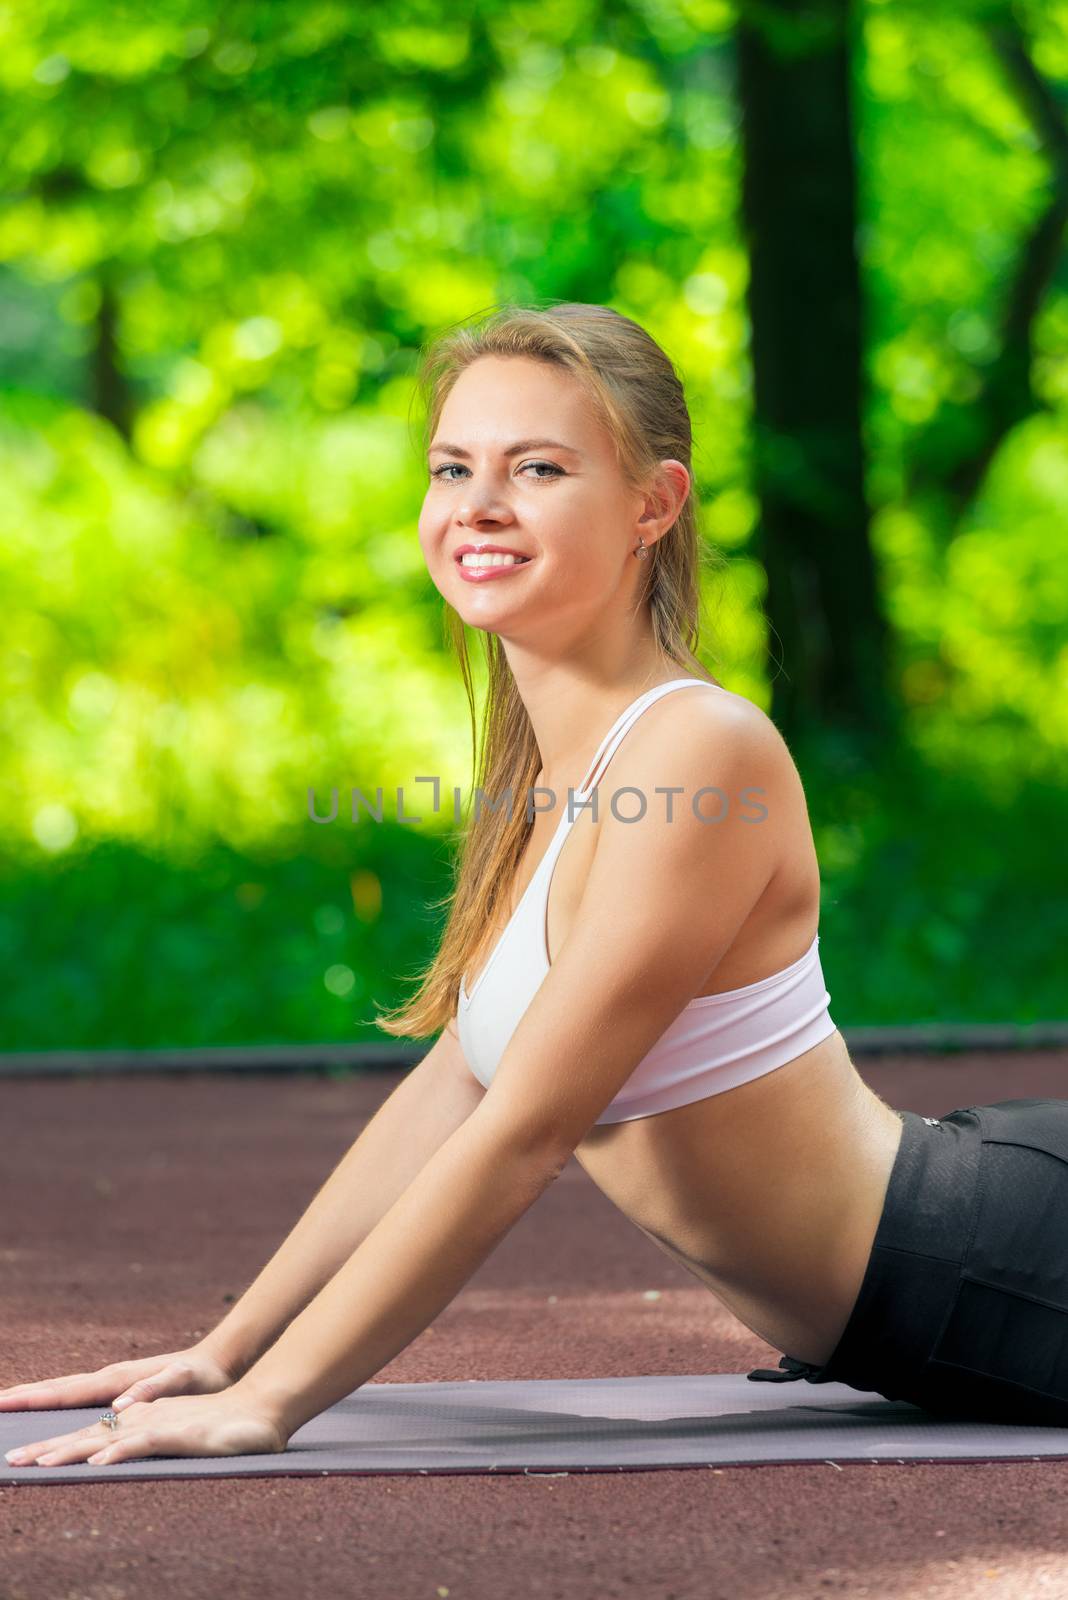 woman doing stretching exercises in the park in the fresh air by kosmsos111